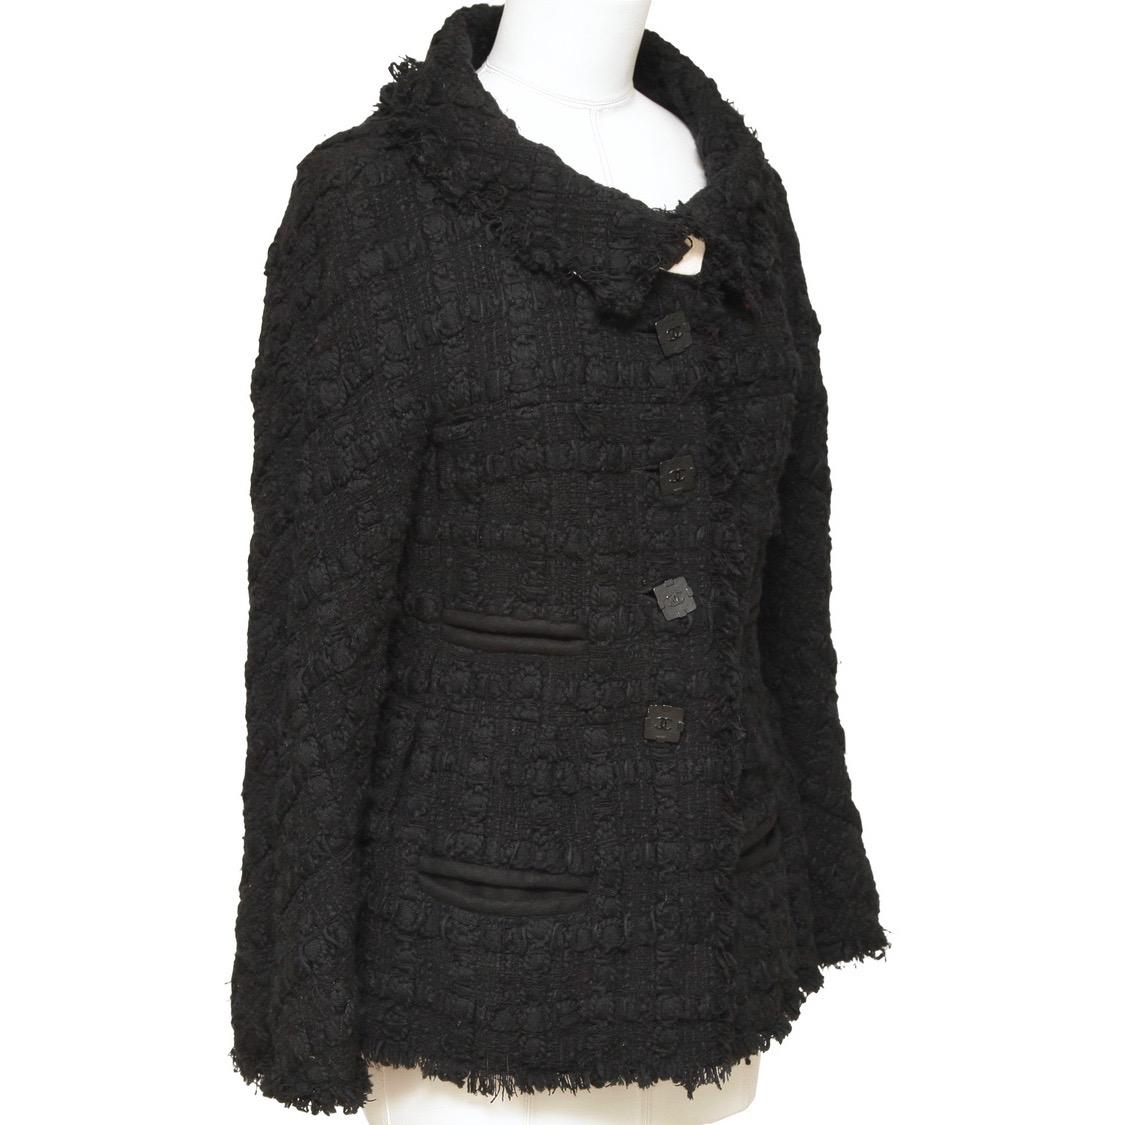 GUARANTEED AUTHENTIC CHANEL 2011A BLACK TWEED JACKET

Matching skirt is available for sale in a separate listing.

Design:
- Acrylic wool blend black tweed jacket from the 2011A collection.
- Peter pan collar.
- Dual slip pockets.
- Black button